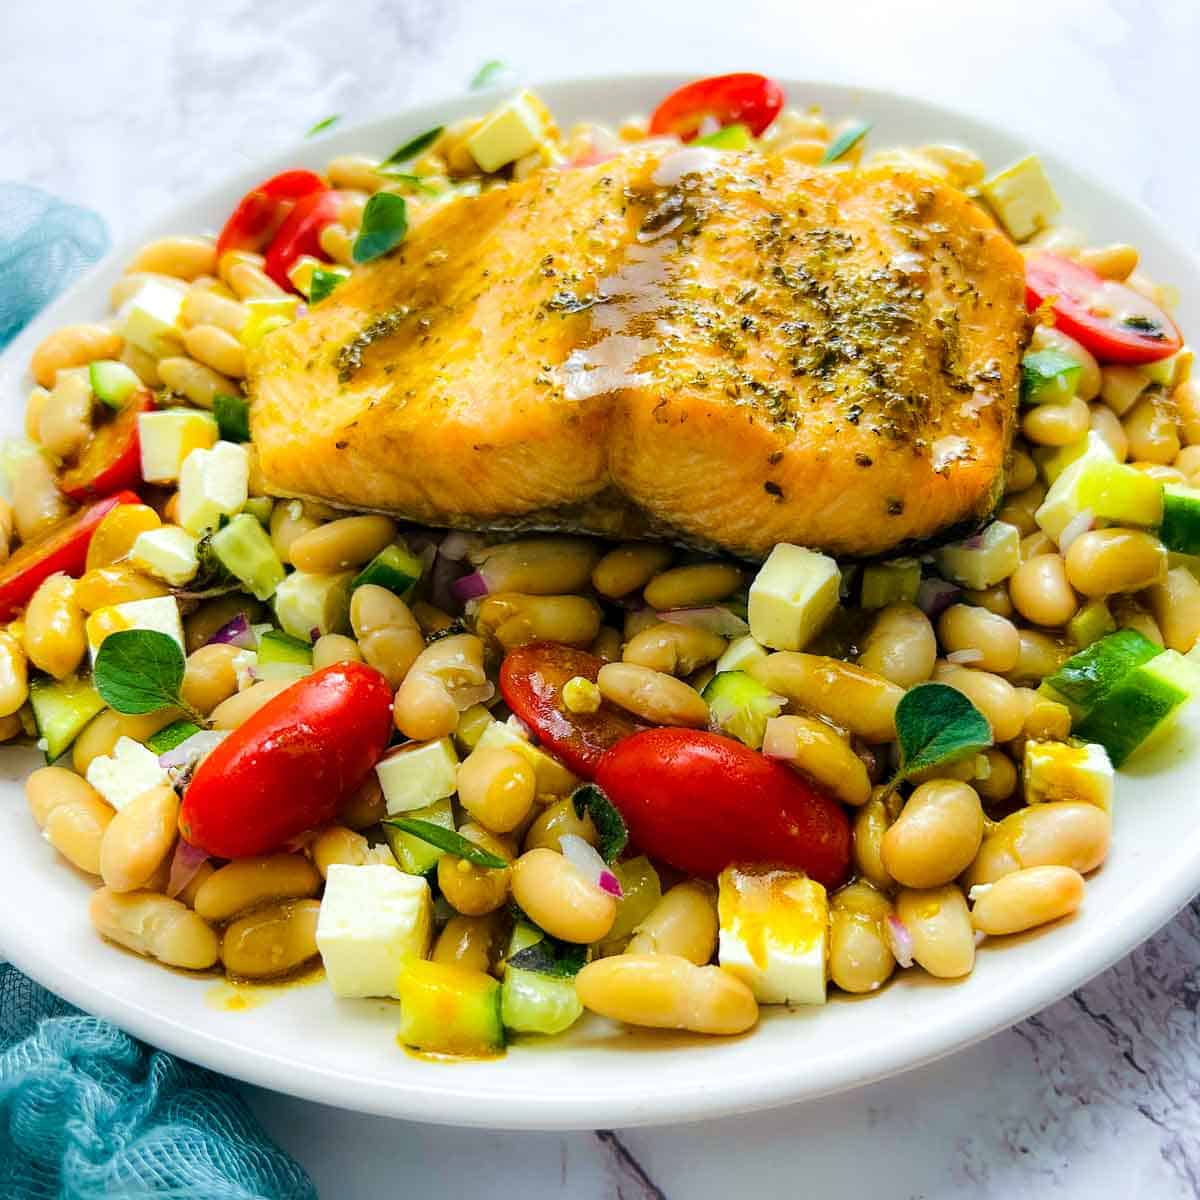 Salmon fillet placed on top of beans and drizzled with dressing.